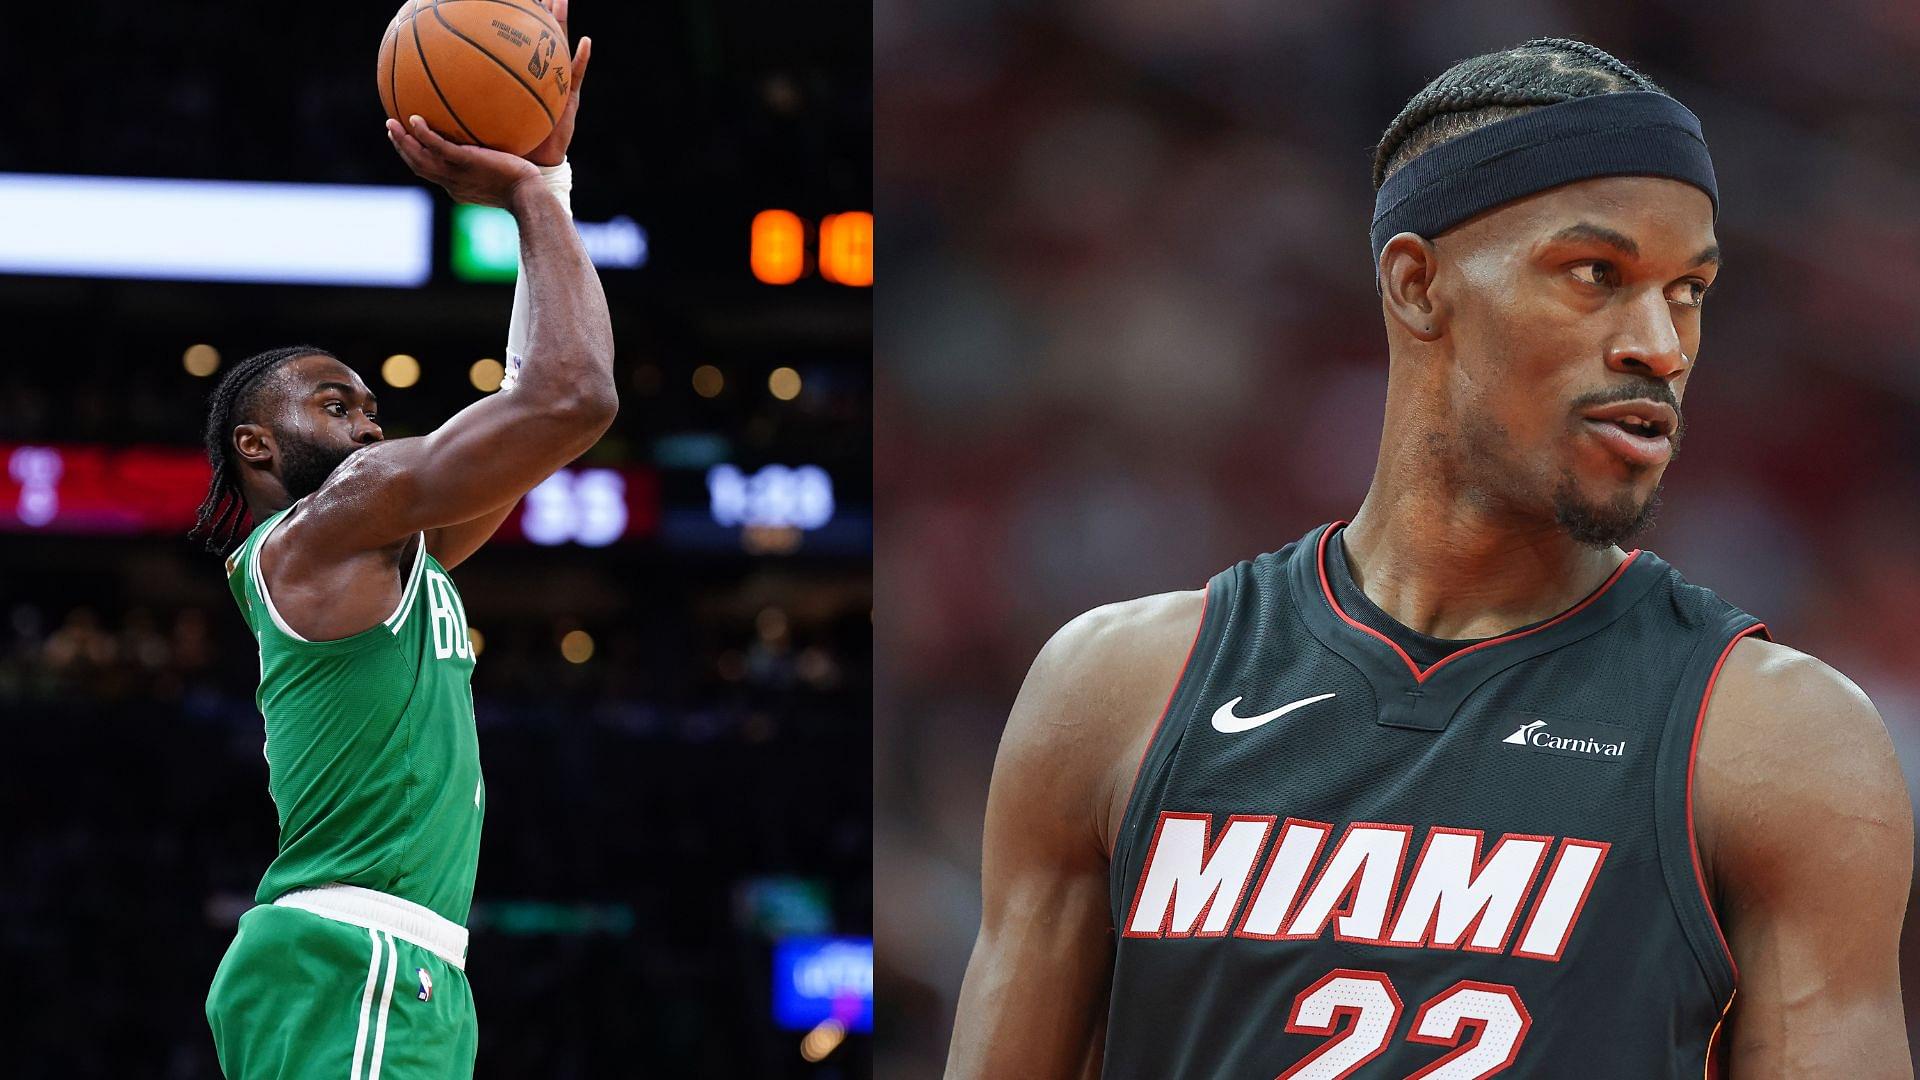 "Feeling Cute, Might Delete Later": Injured Jimmy Butler Trolls Jaylen Brown After The Heat Beat The Celtics In Game 2